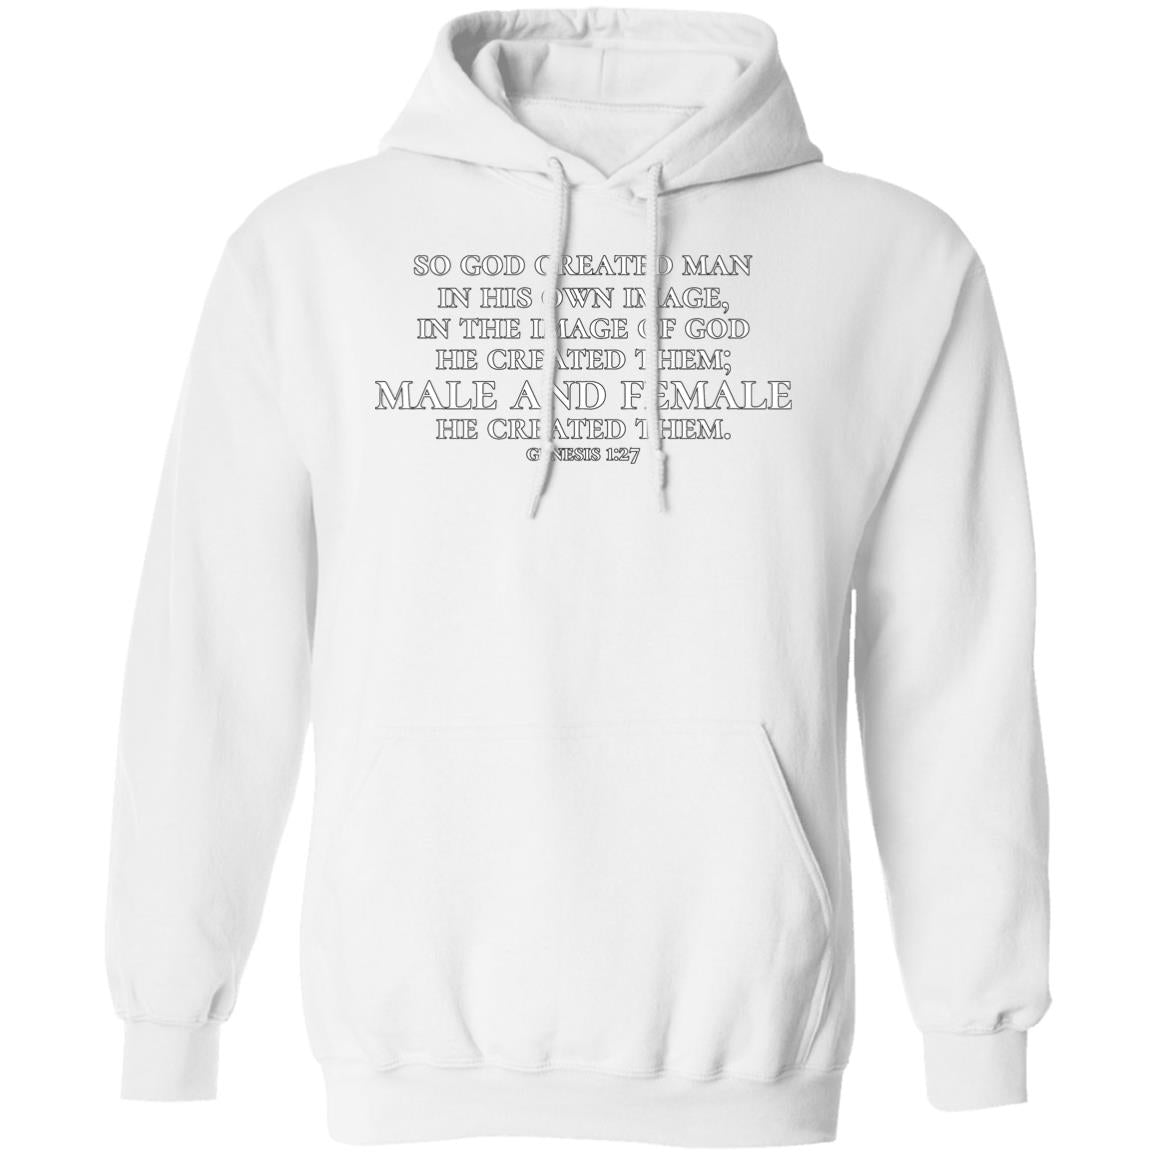 Why We Protect Our Children (Unisex Hoodie)